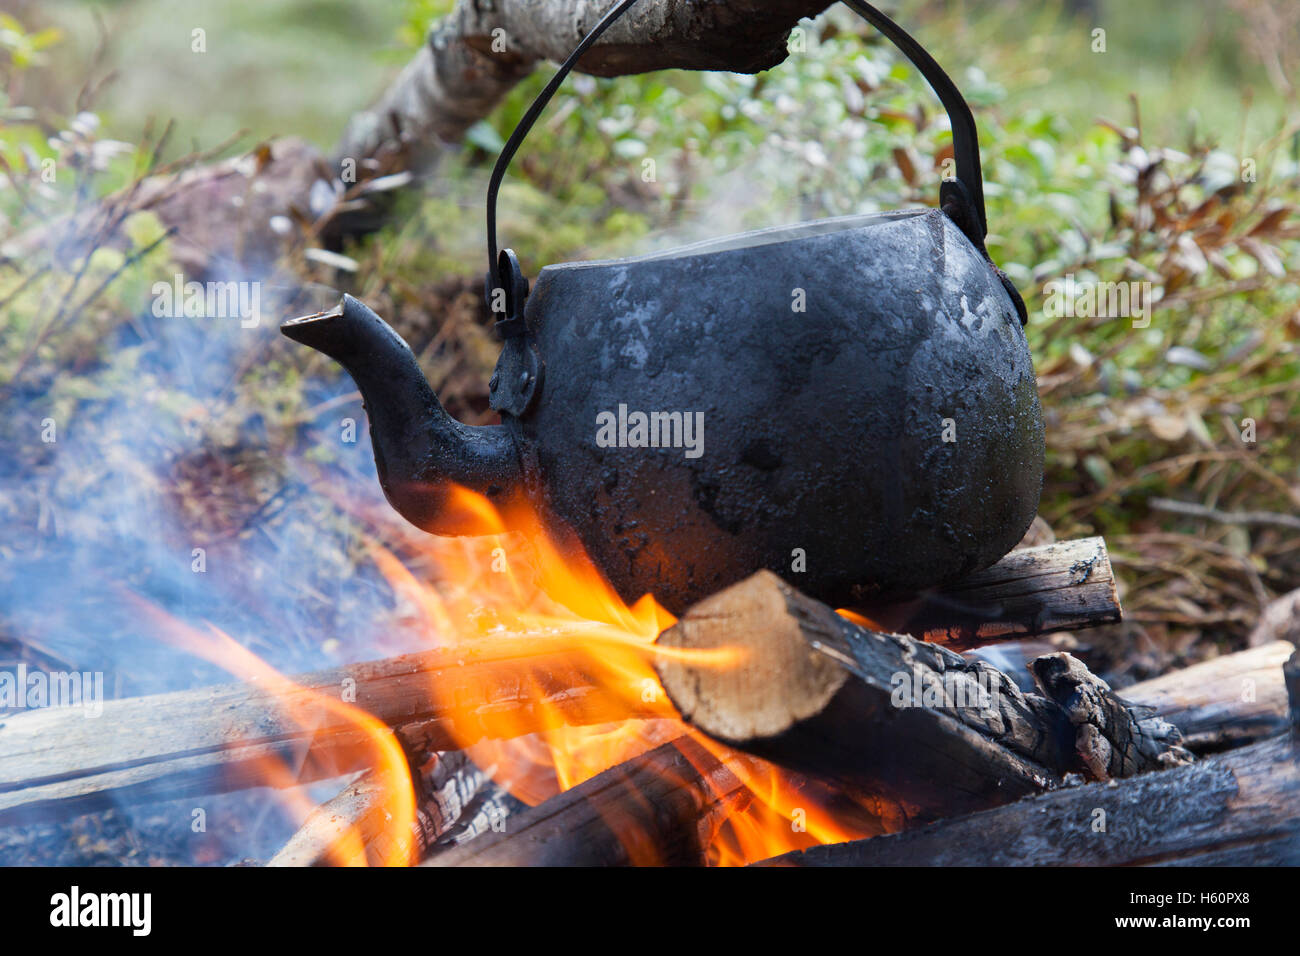 Blackened tin kettle from soot boiling water over flames from campfire during hike in forest Stock Photo